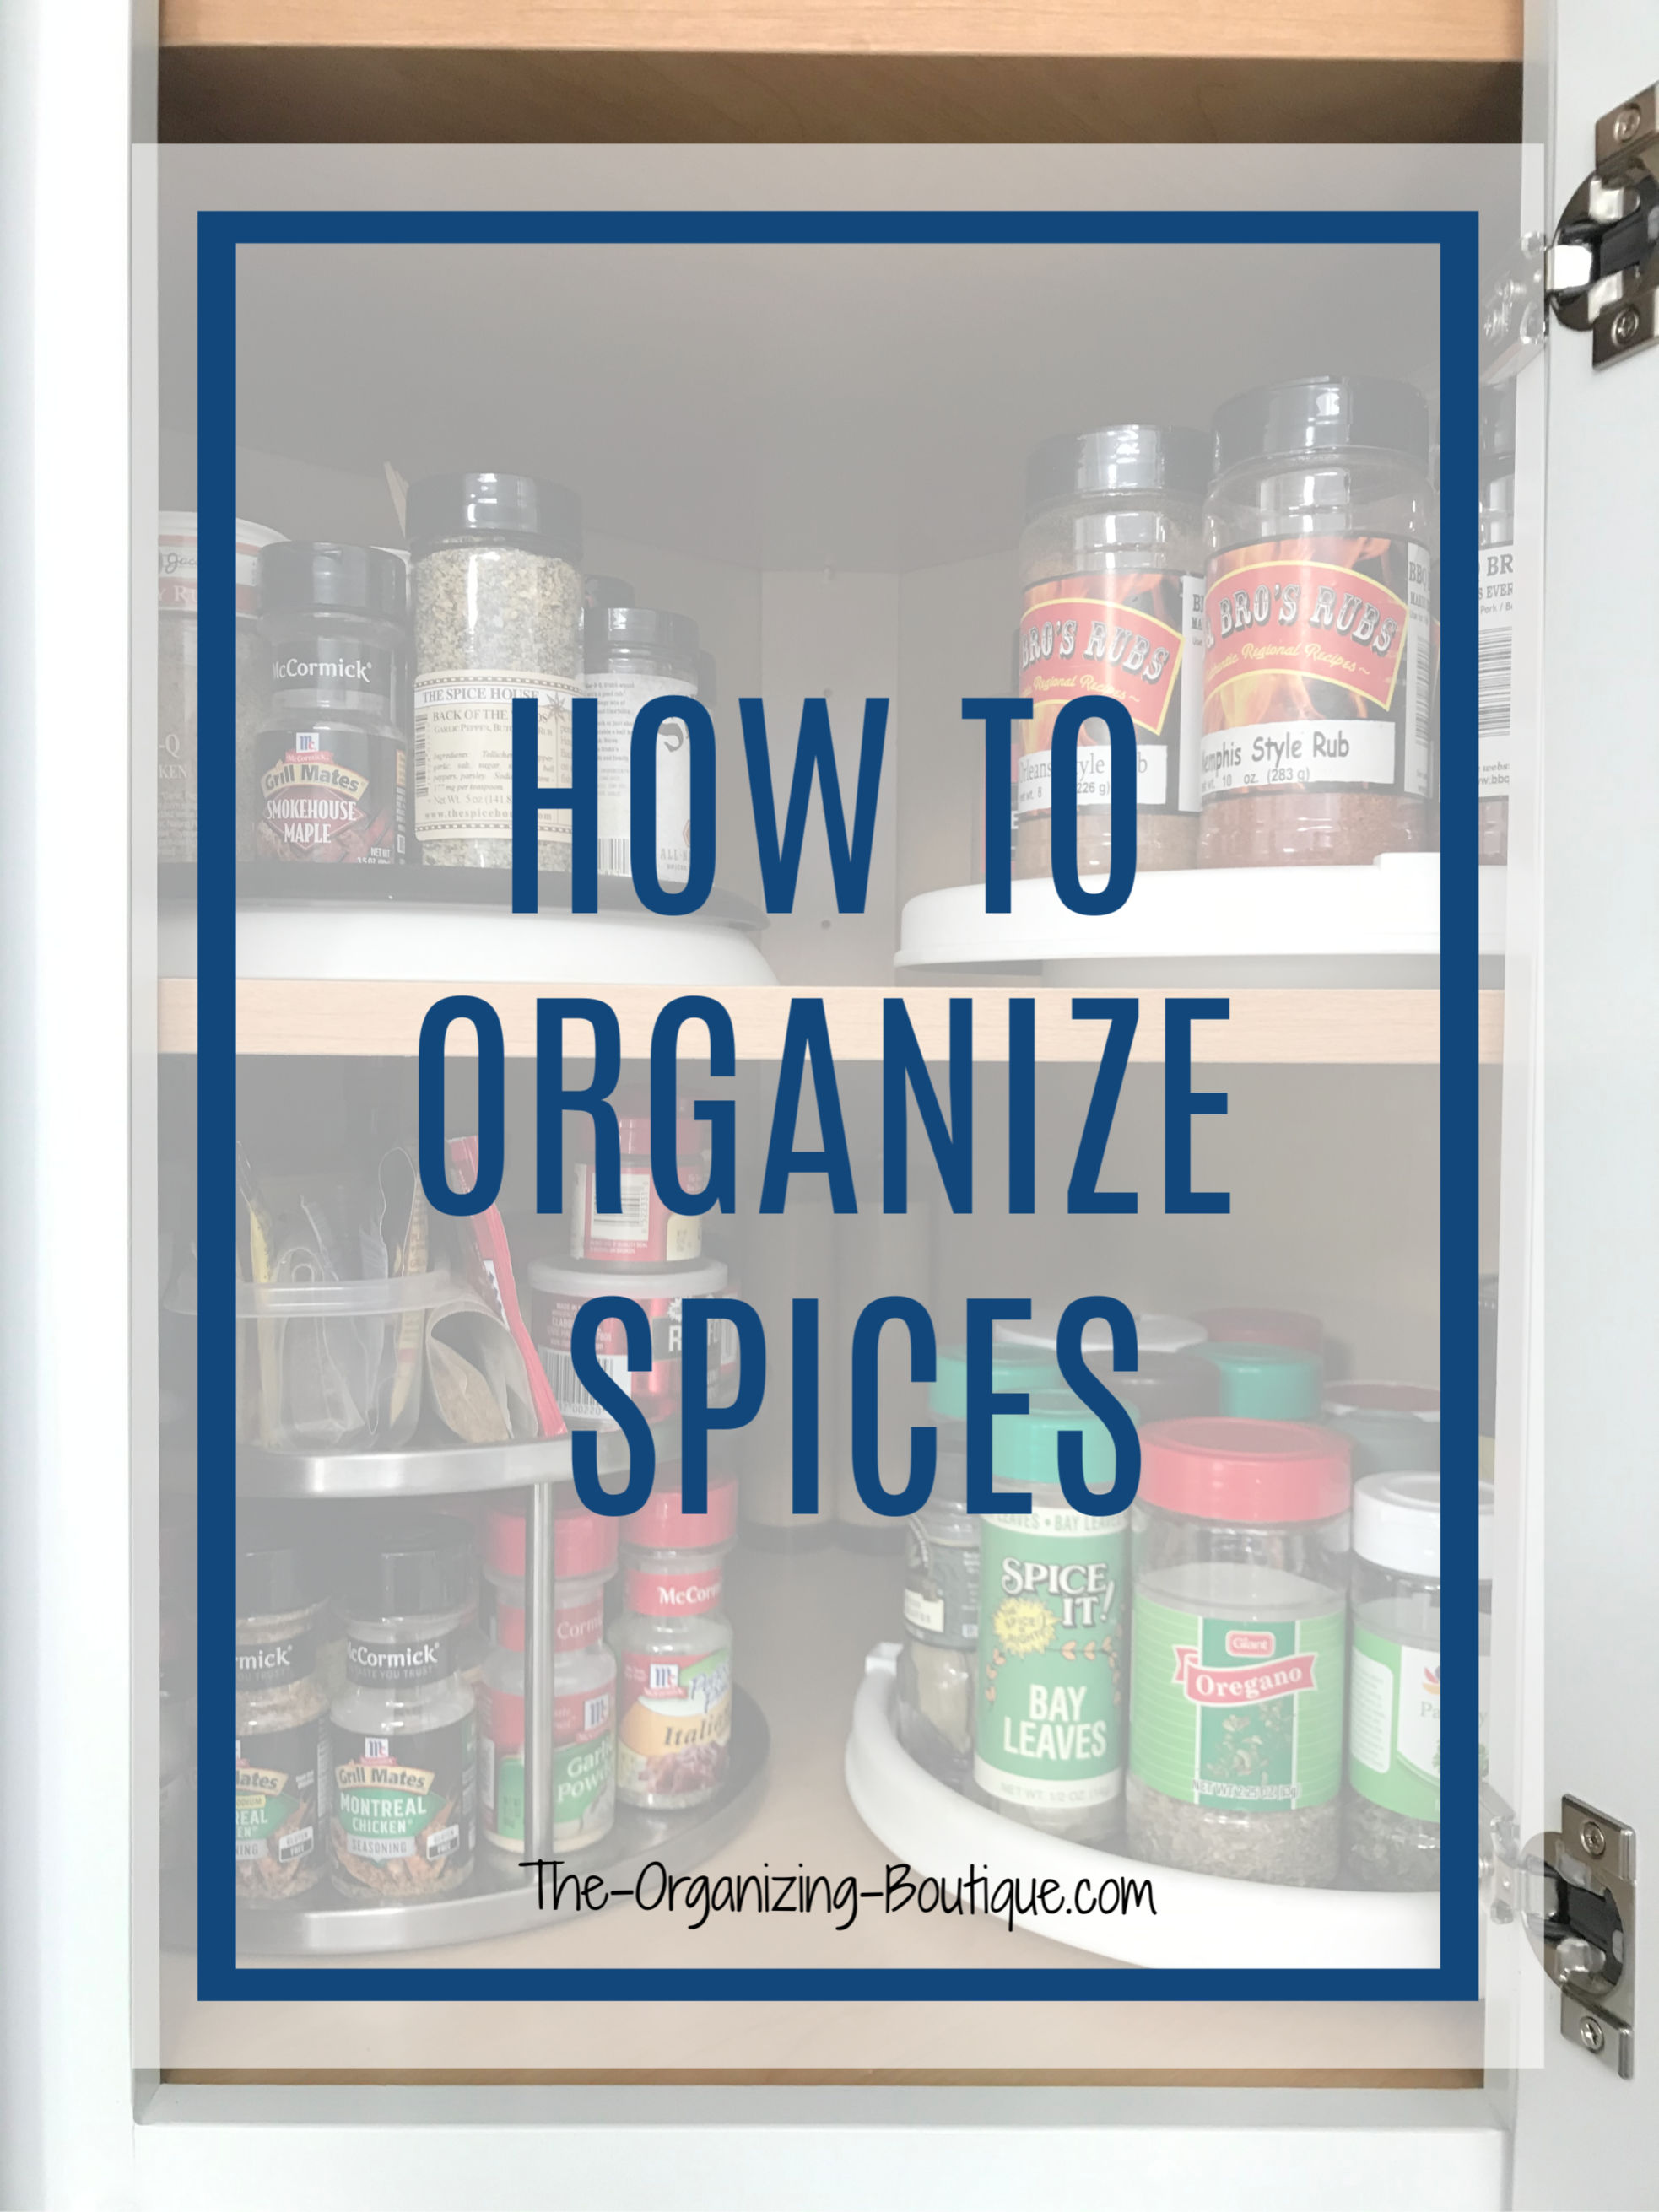 https://www.the-organizing-boutique.com/images/How-To-Organize-Spices-Title.jpg